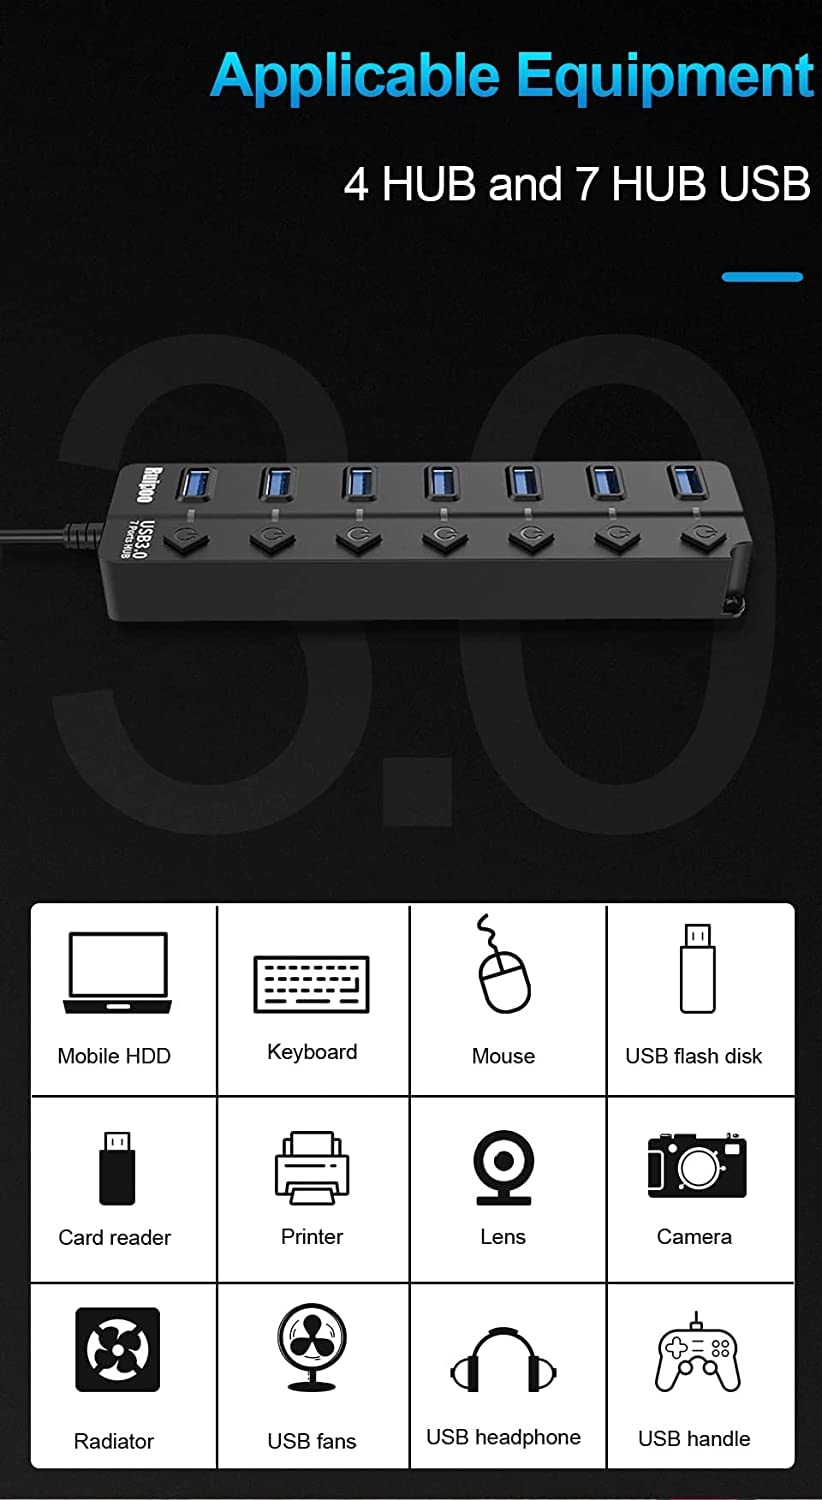 ADZOY Powered USB Hub 3.0, 7-Port USB Data Hub Splitter with One Smart Charging Port and Individual On/Off Switches and 5V/1A Power Adapter USB Extensionfor Laptop, PC, Computer, Mobile HDD